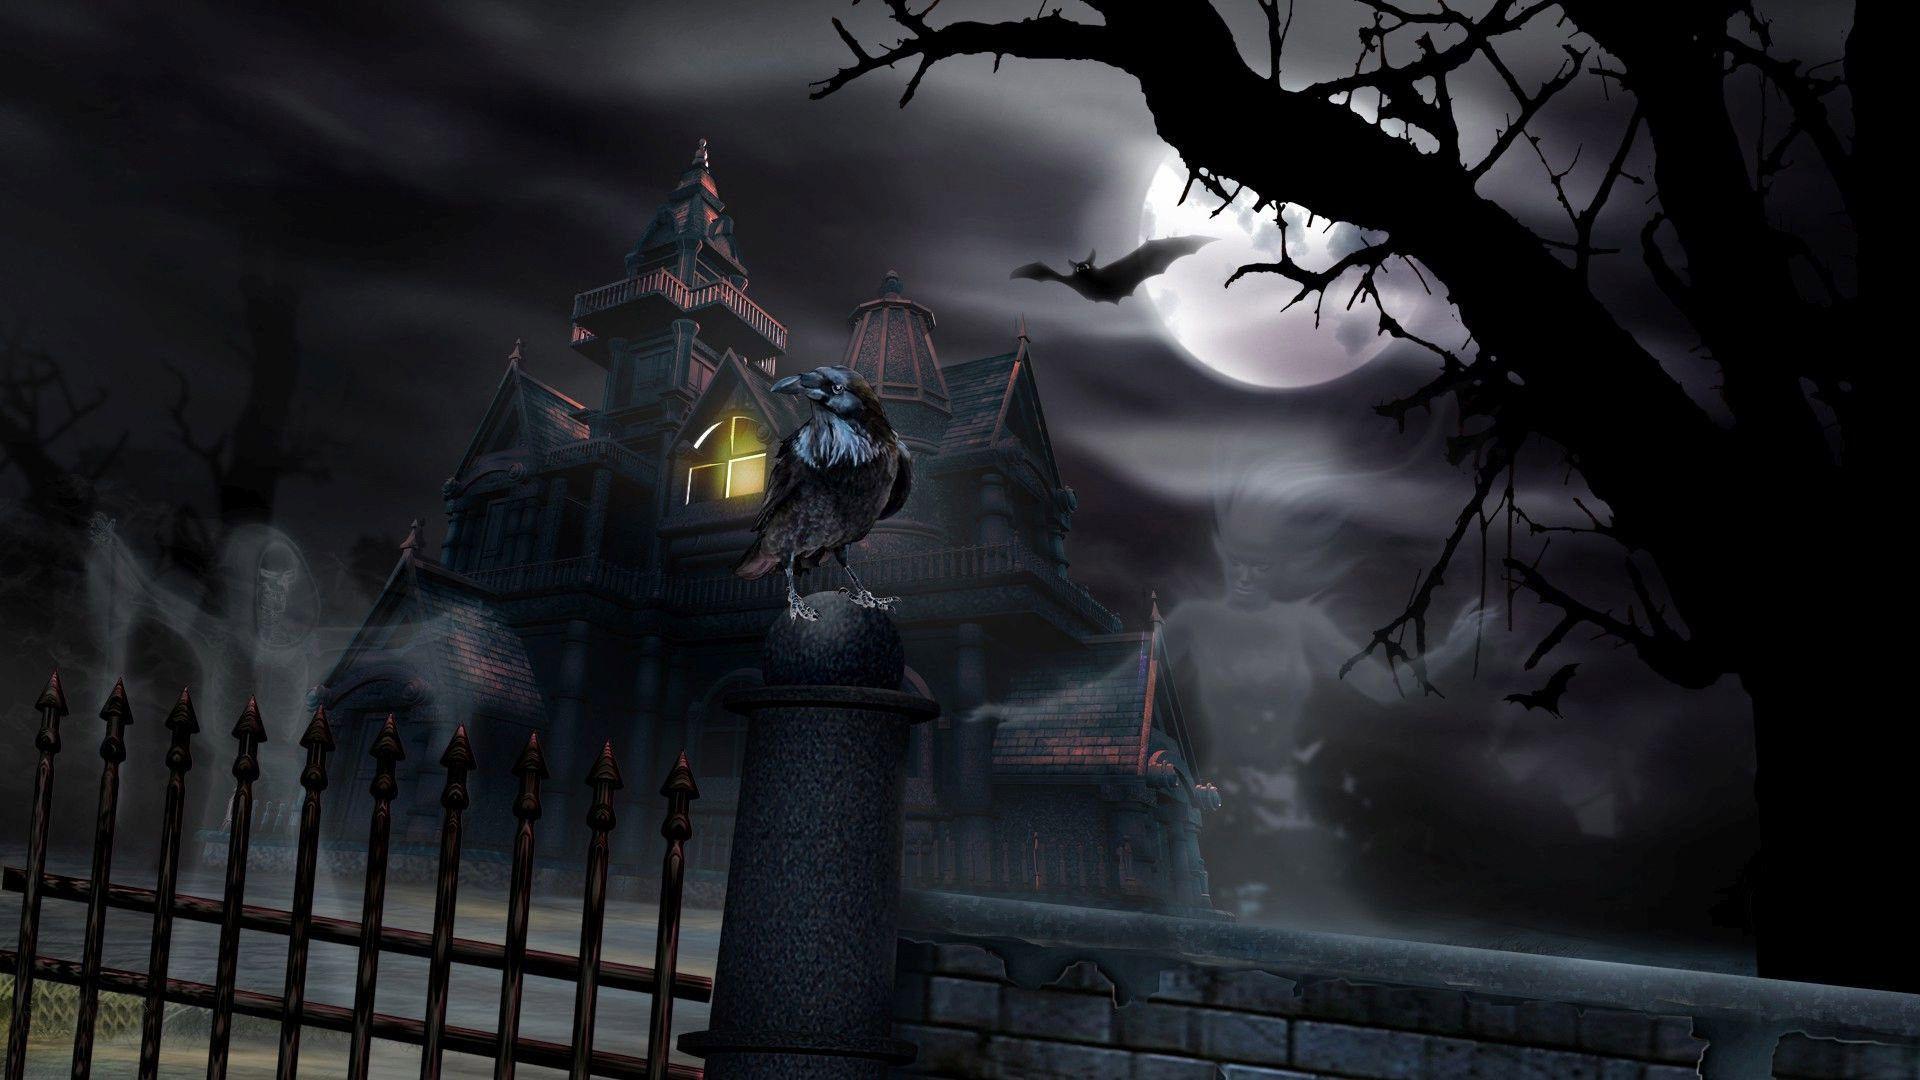 Haunted House Wallpapers - Wallpaper Cave